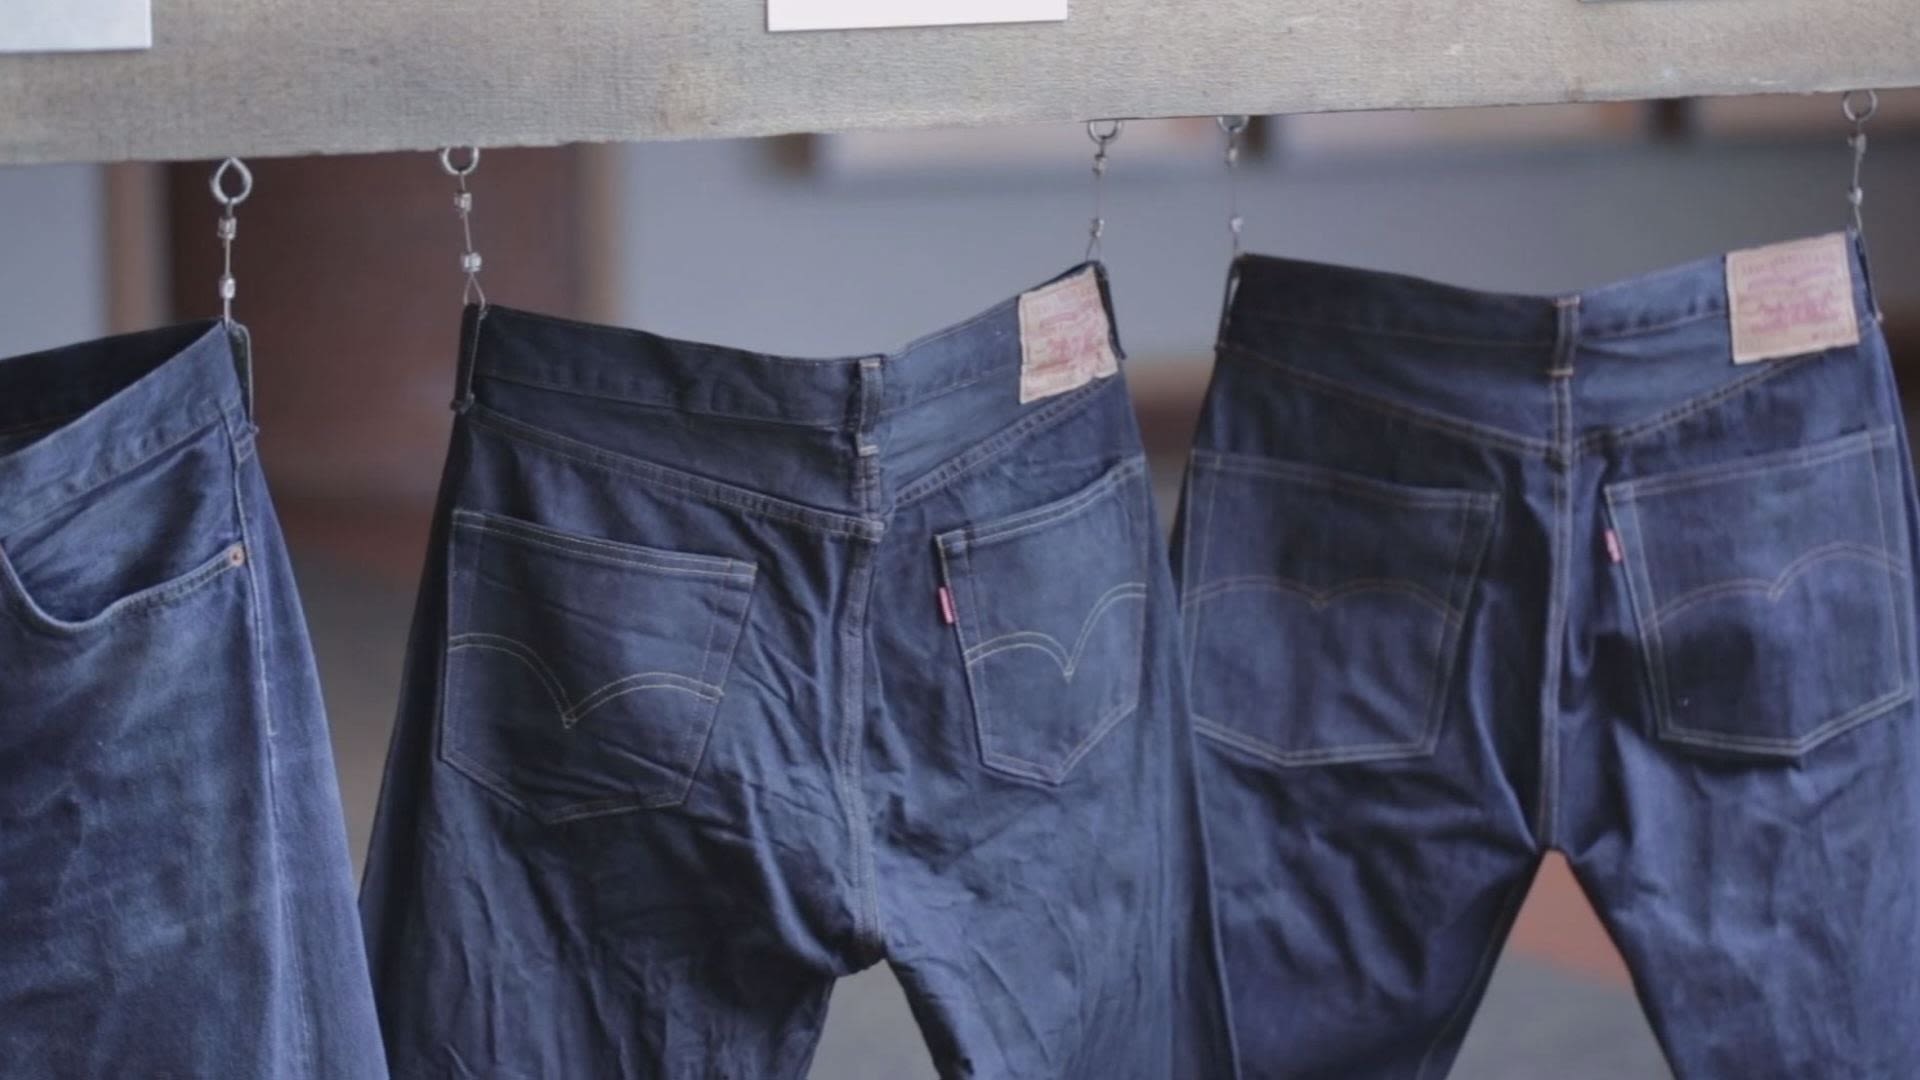 Levi Strauss plans IPO that values maker of the first blue jeans at